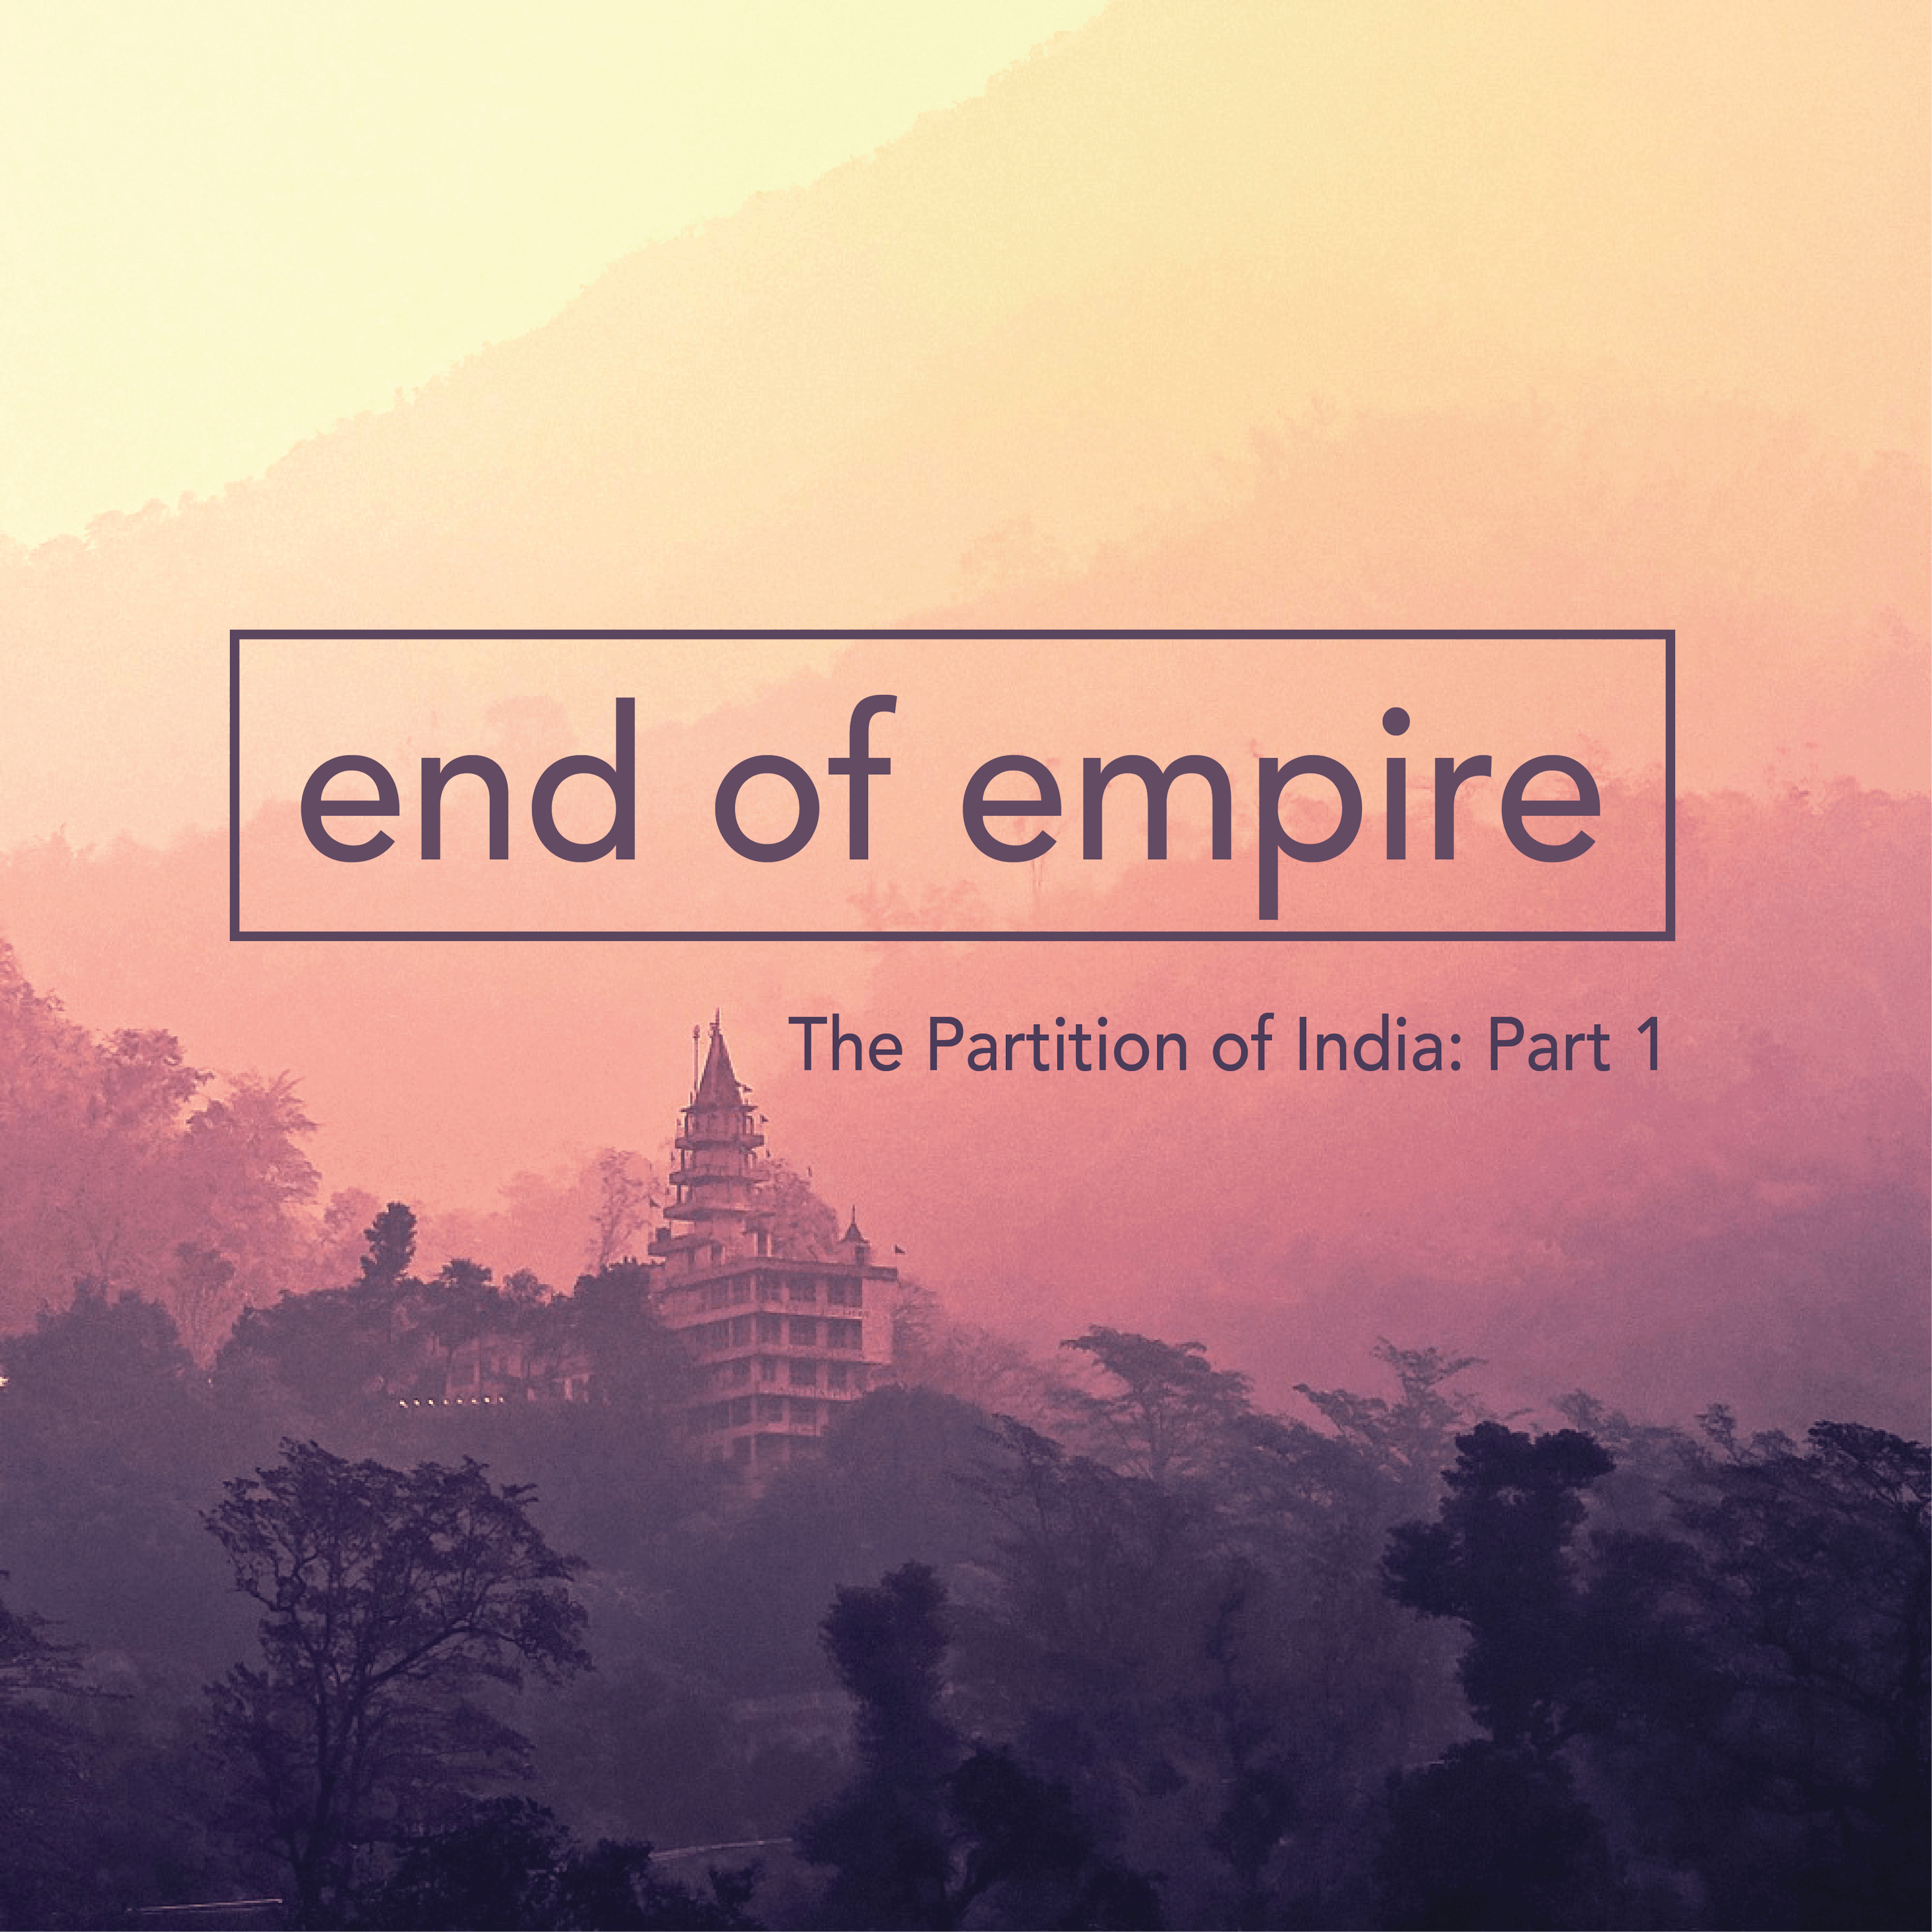 The Partition of India – Part 1: End of Empire Image